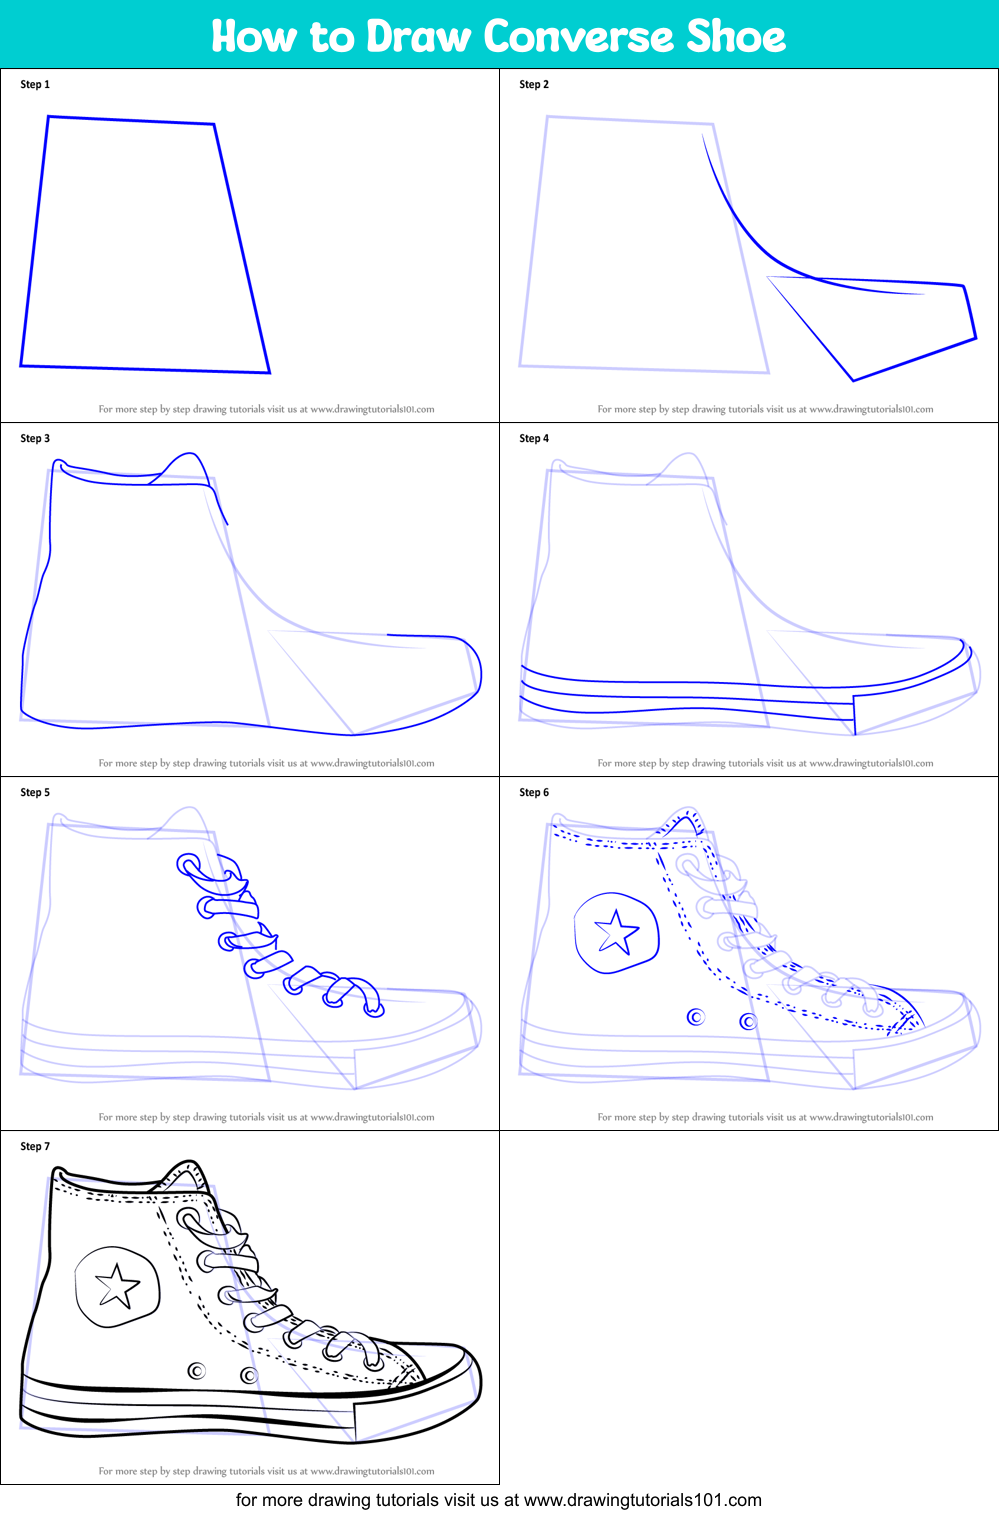 How to Draw Converse Shoe printable step by step drawing sheet :  DrawingTutorials101.com